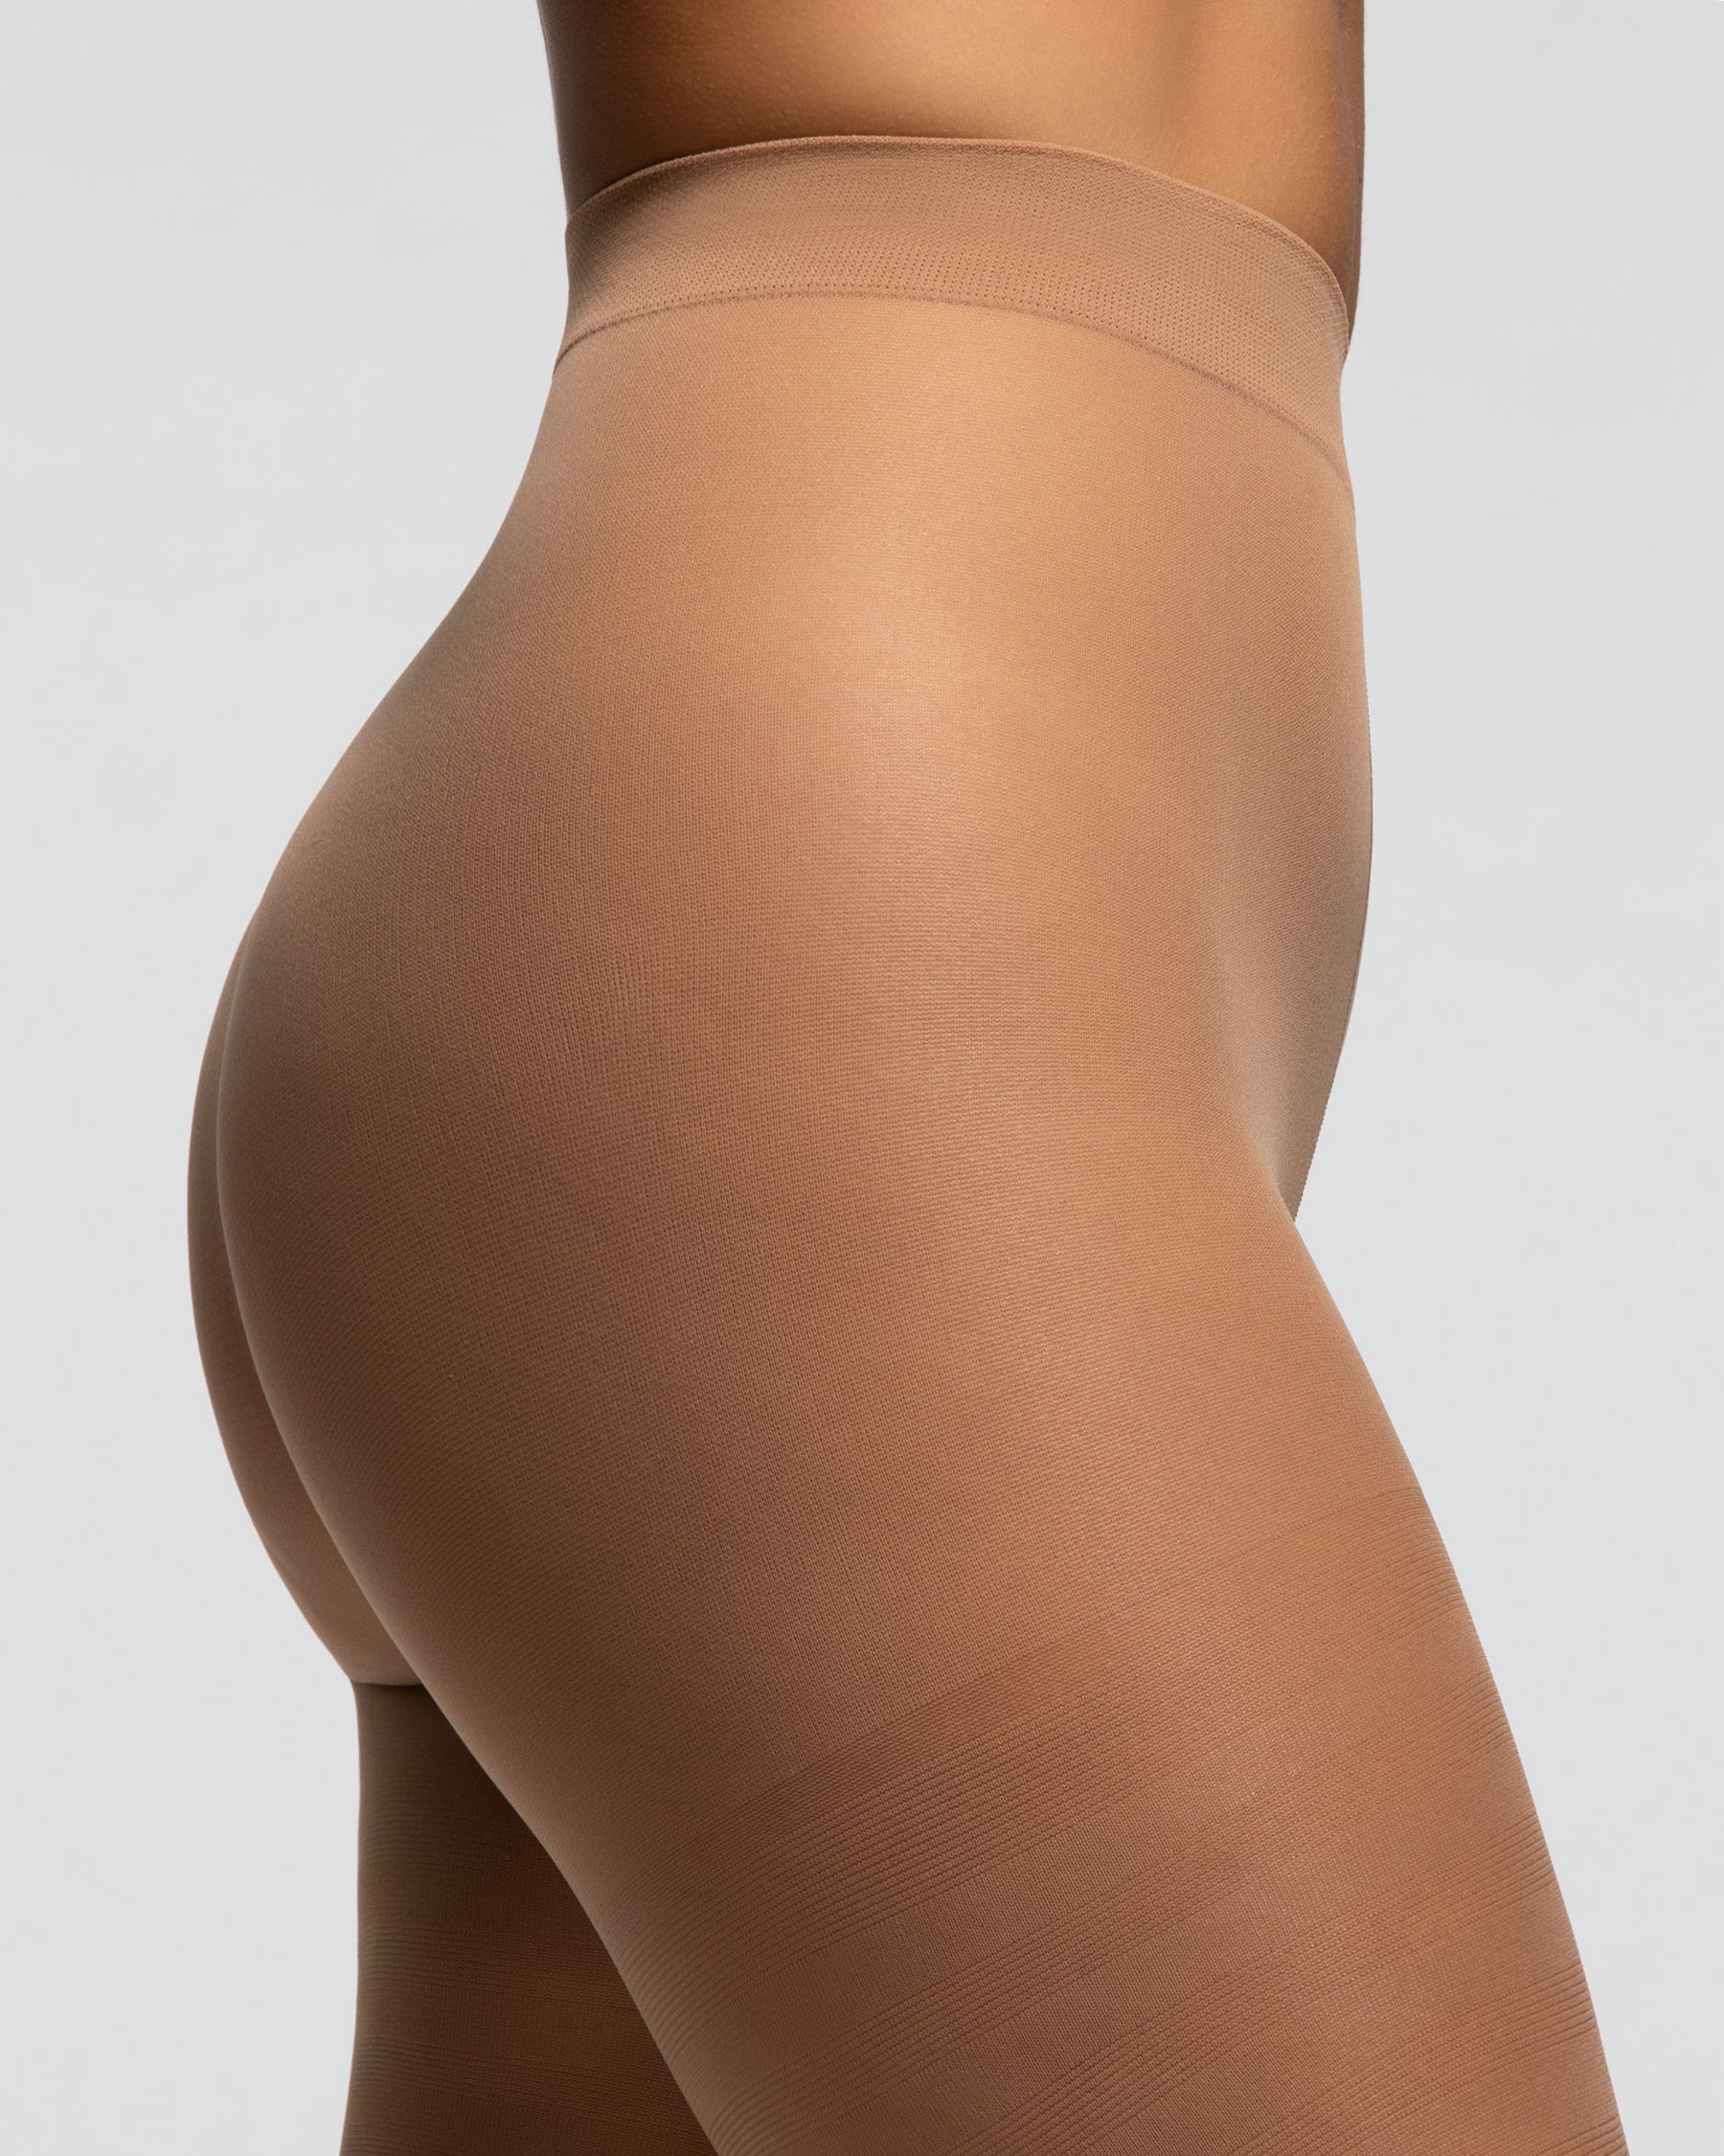 Wolford Tights 10 15 20 40 50 Denier Shaping Control Patterned Sheer Opaque  Sexy